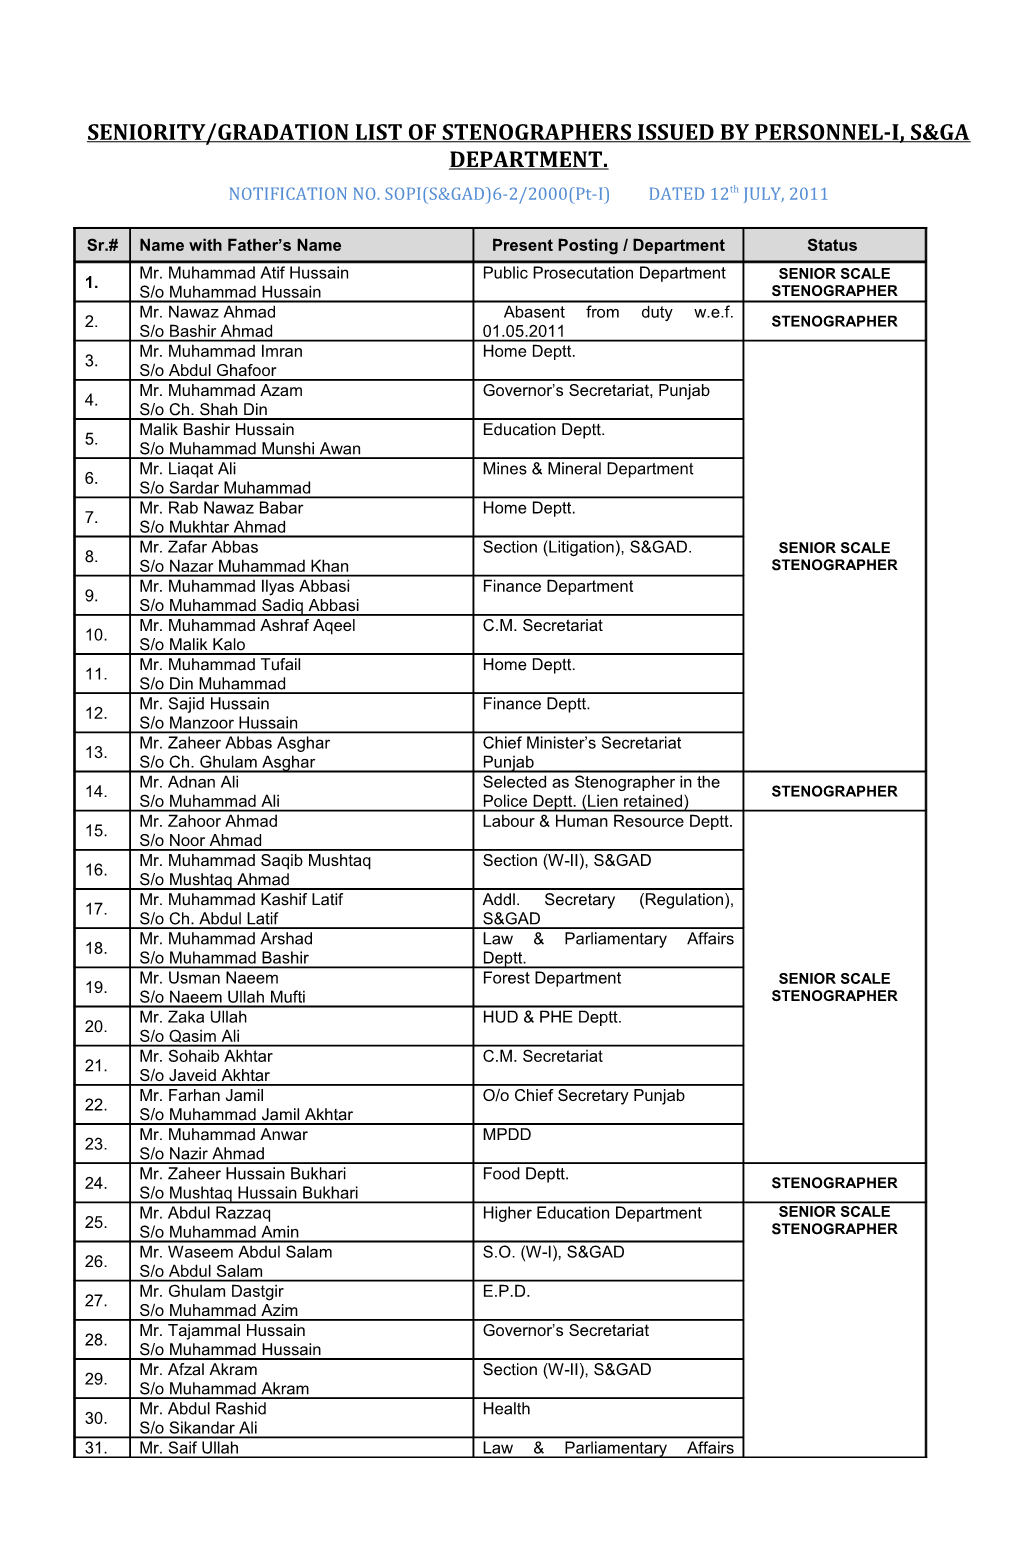 Seniority/Gradation List of Stenographers Issued by Personnel-I, S&Ga Department